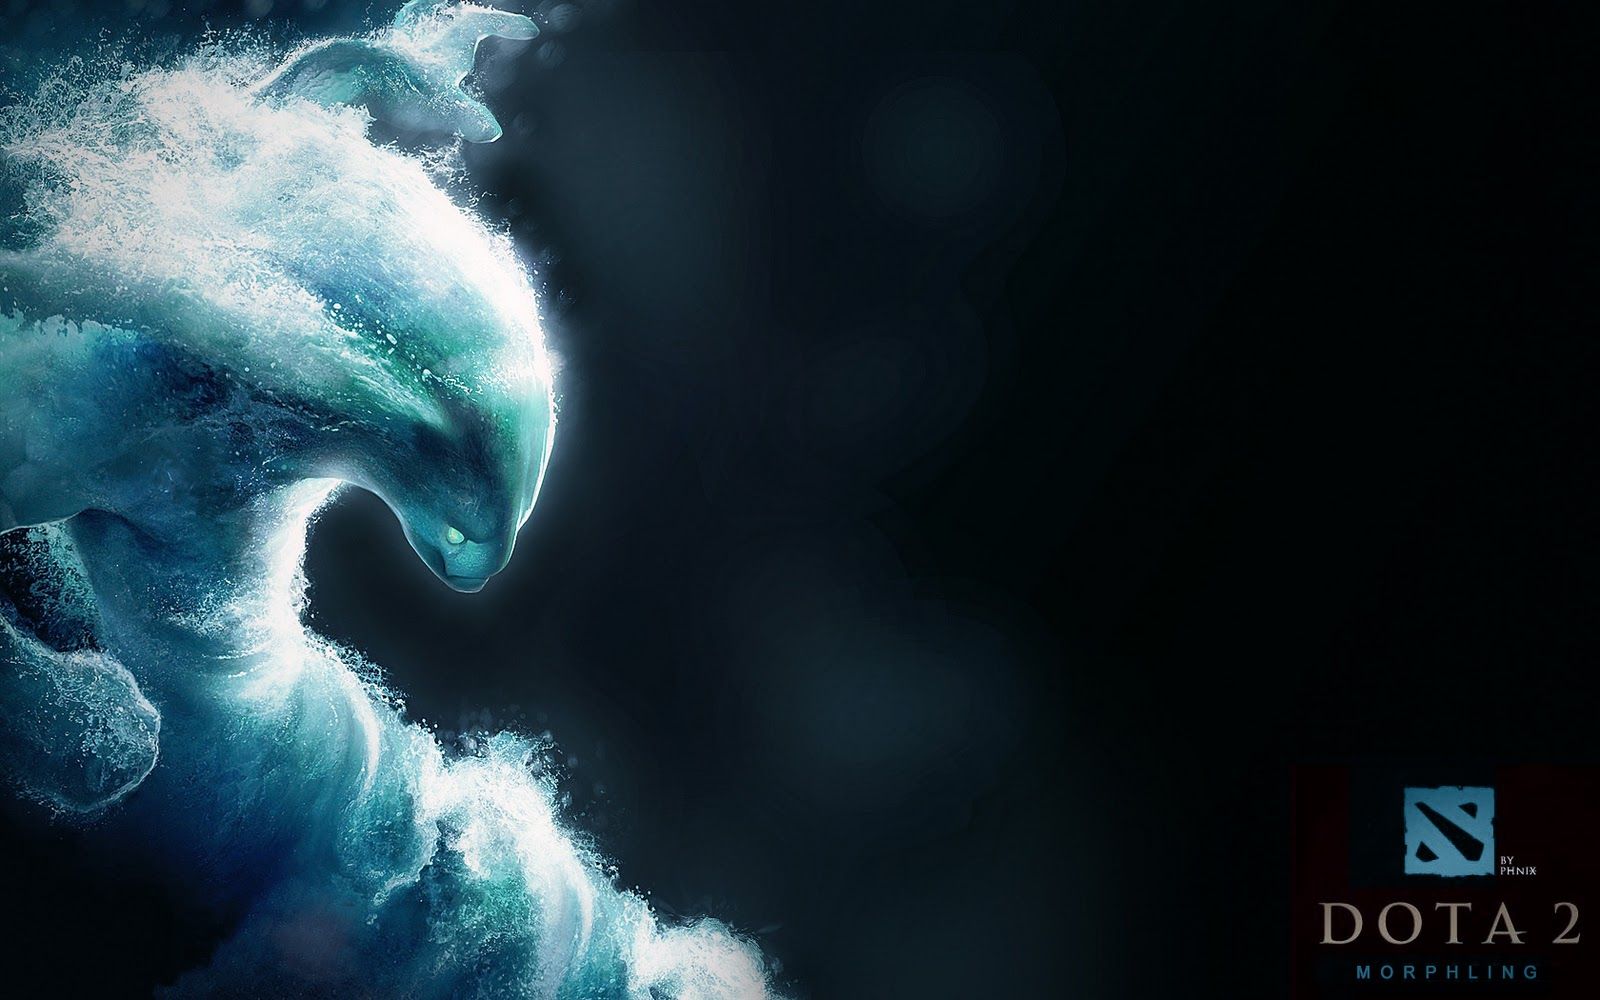 1305 DotA 2 HD Wallpapers | Backgrounds - Wallpaper Abyss - Page 2